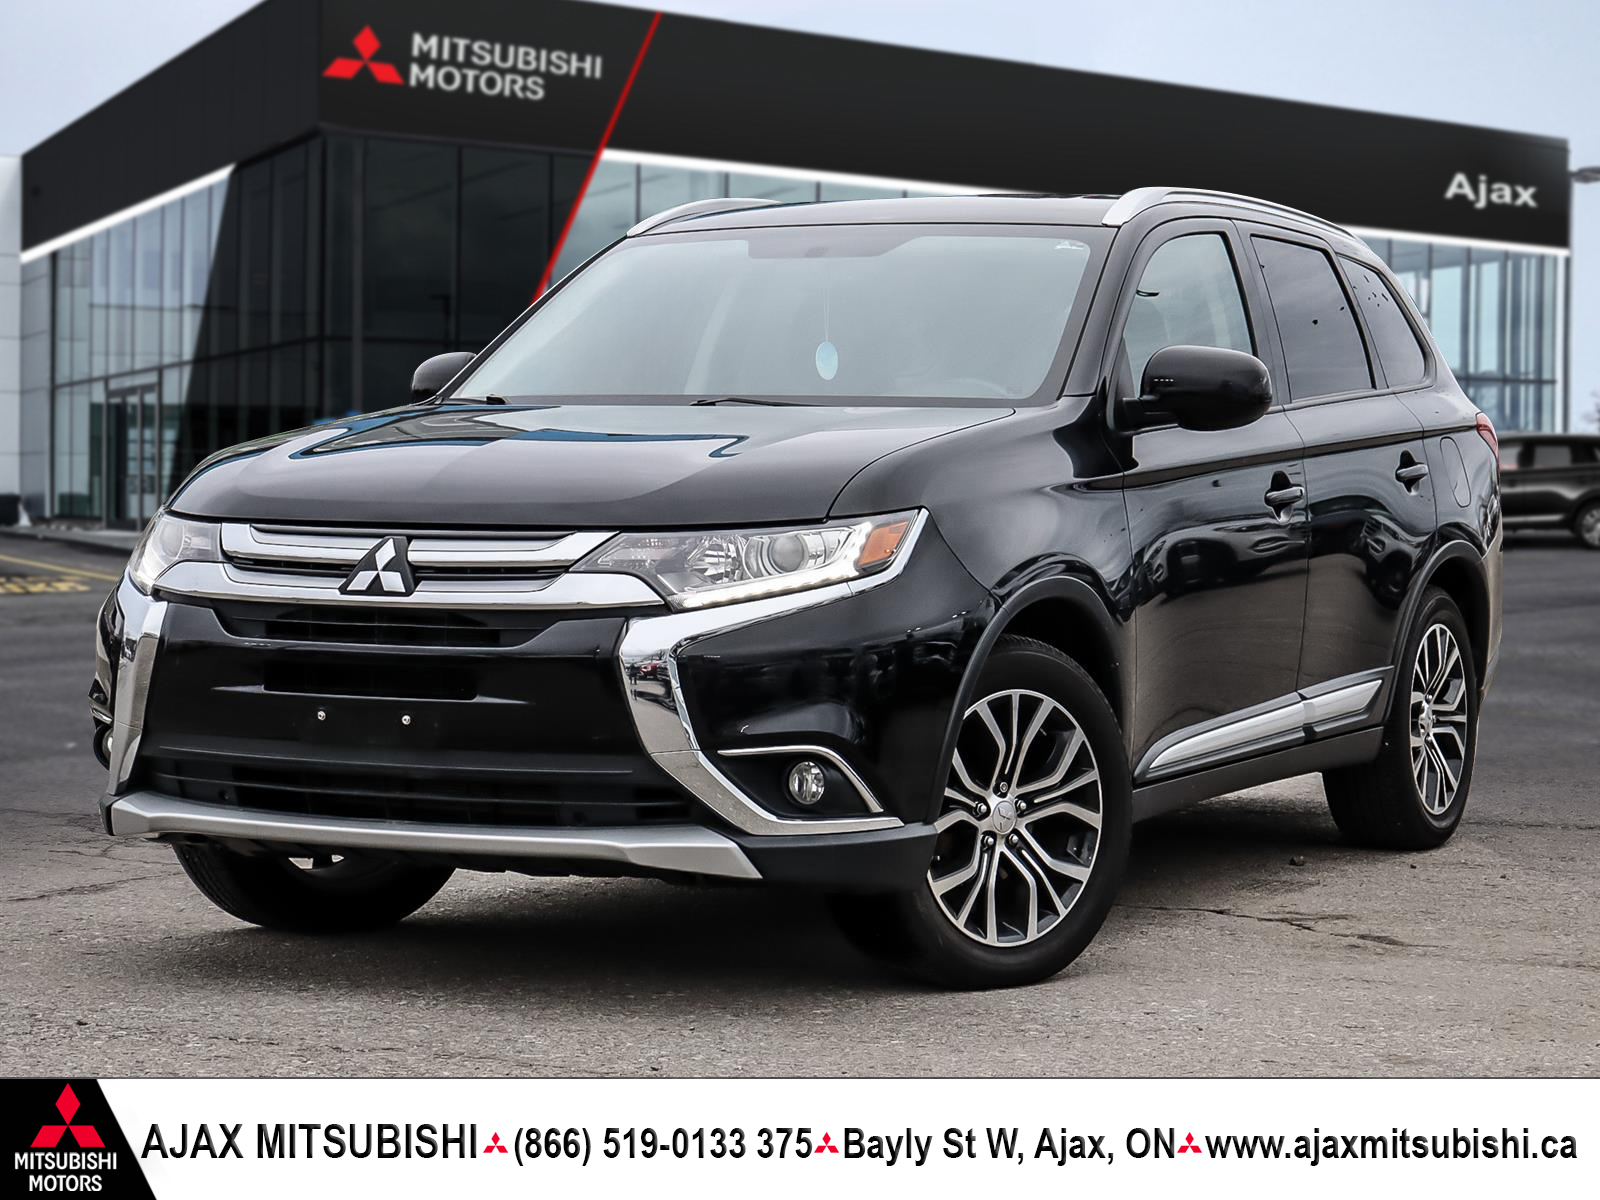 2017 Mitsubishi Outlander ES- Touring Edition, Heated Seats, Sunroof and 18A